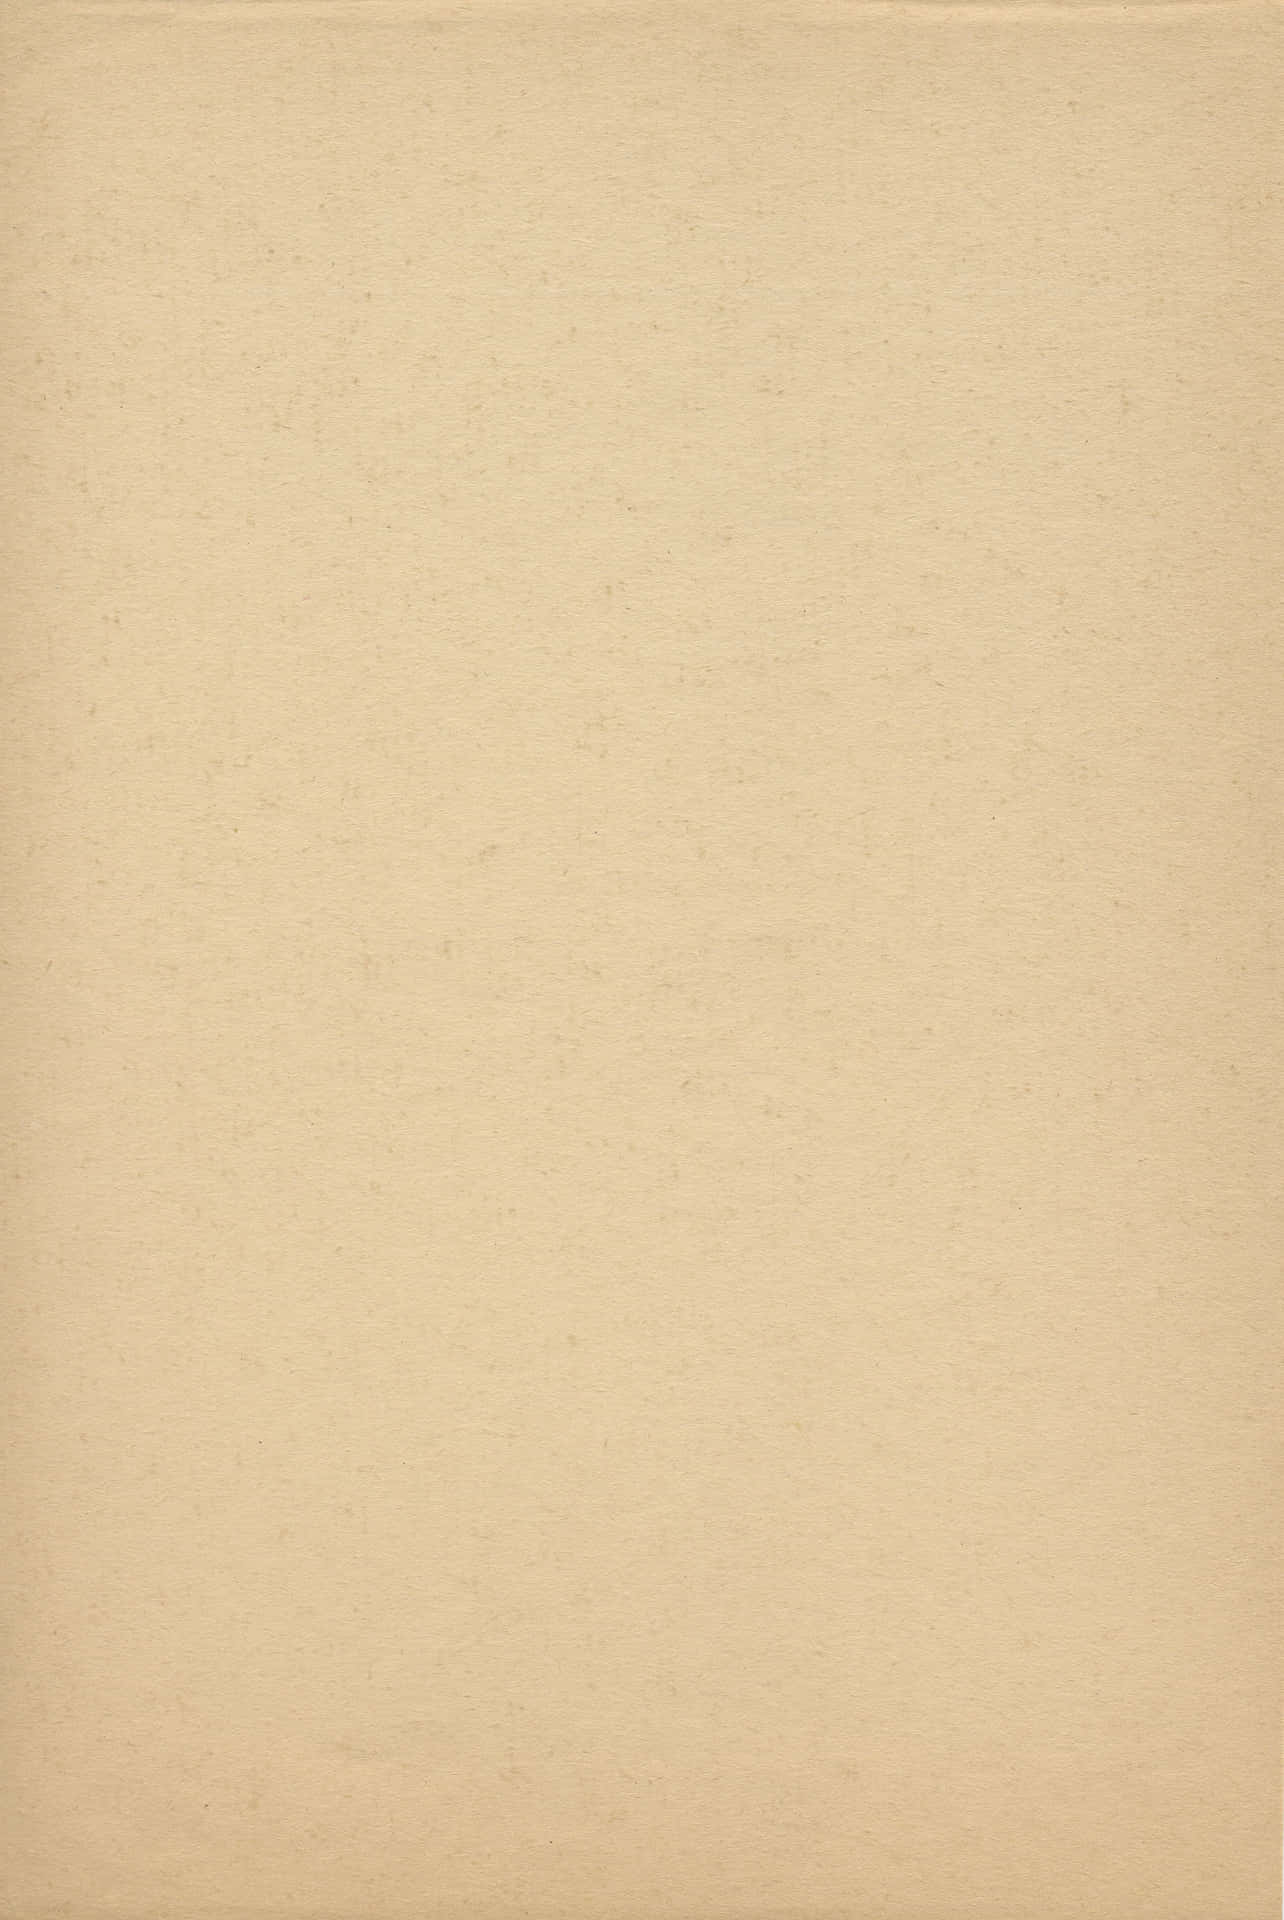 A Beige Paper With A Small Square On It